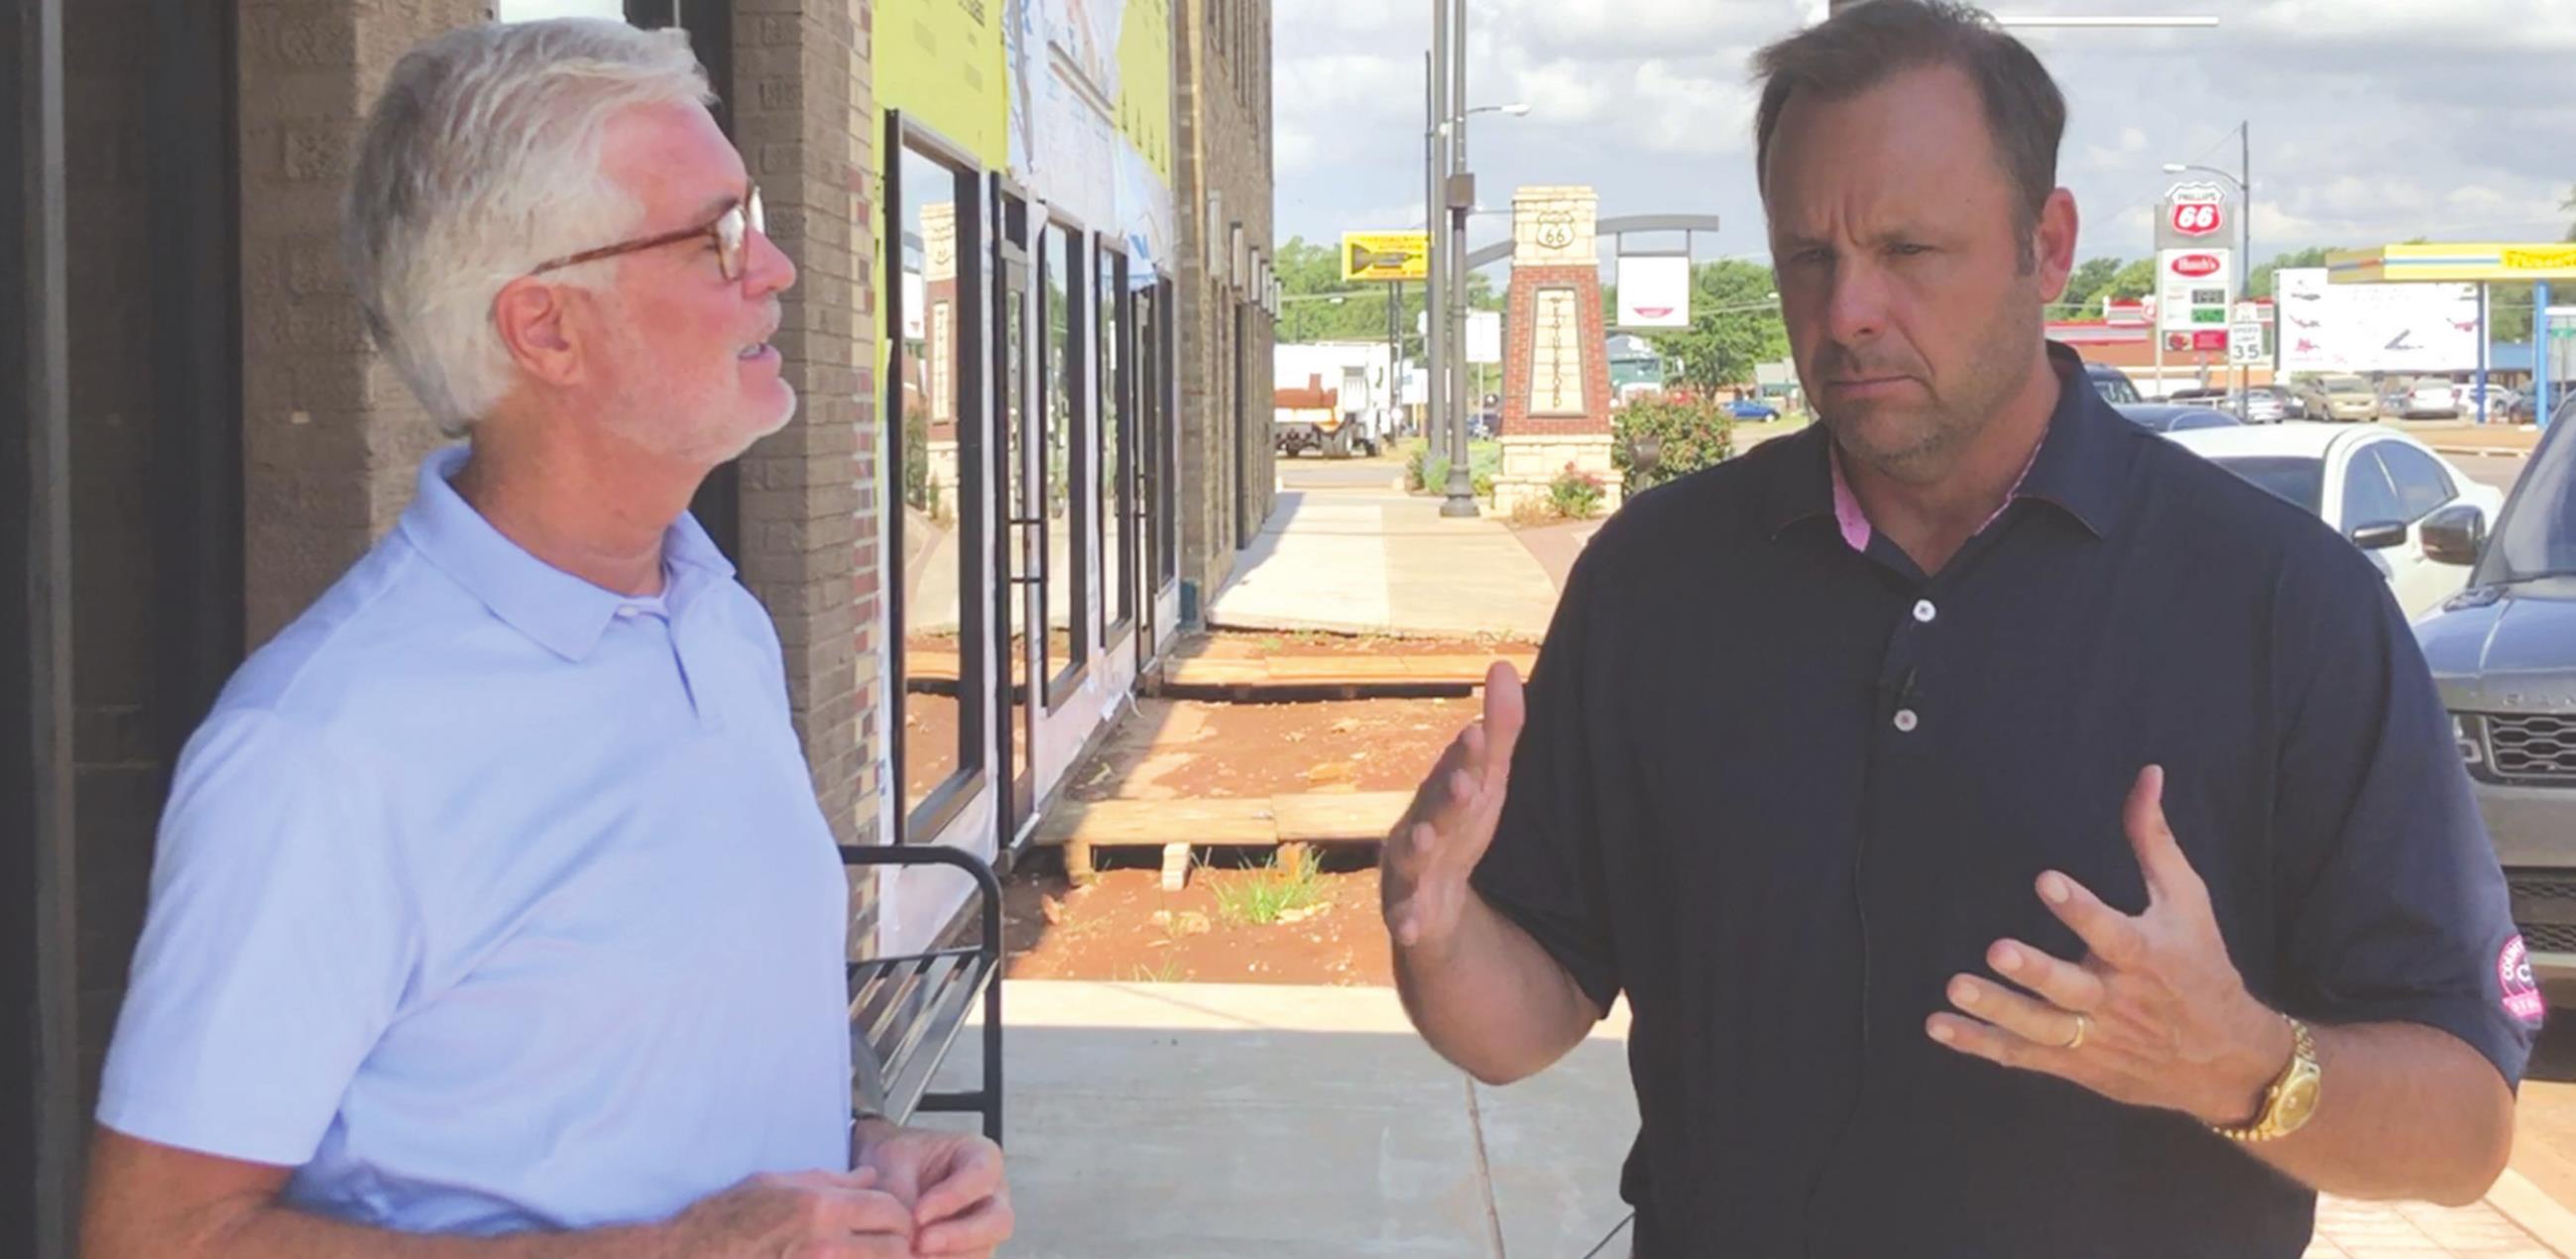 Bob Bartmann, right, speaks with Weatherford Daily News Publisher Phillip Reid about the ongoing renovations at 212 and 214 W. Main St. in Towne Centre.